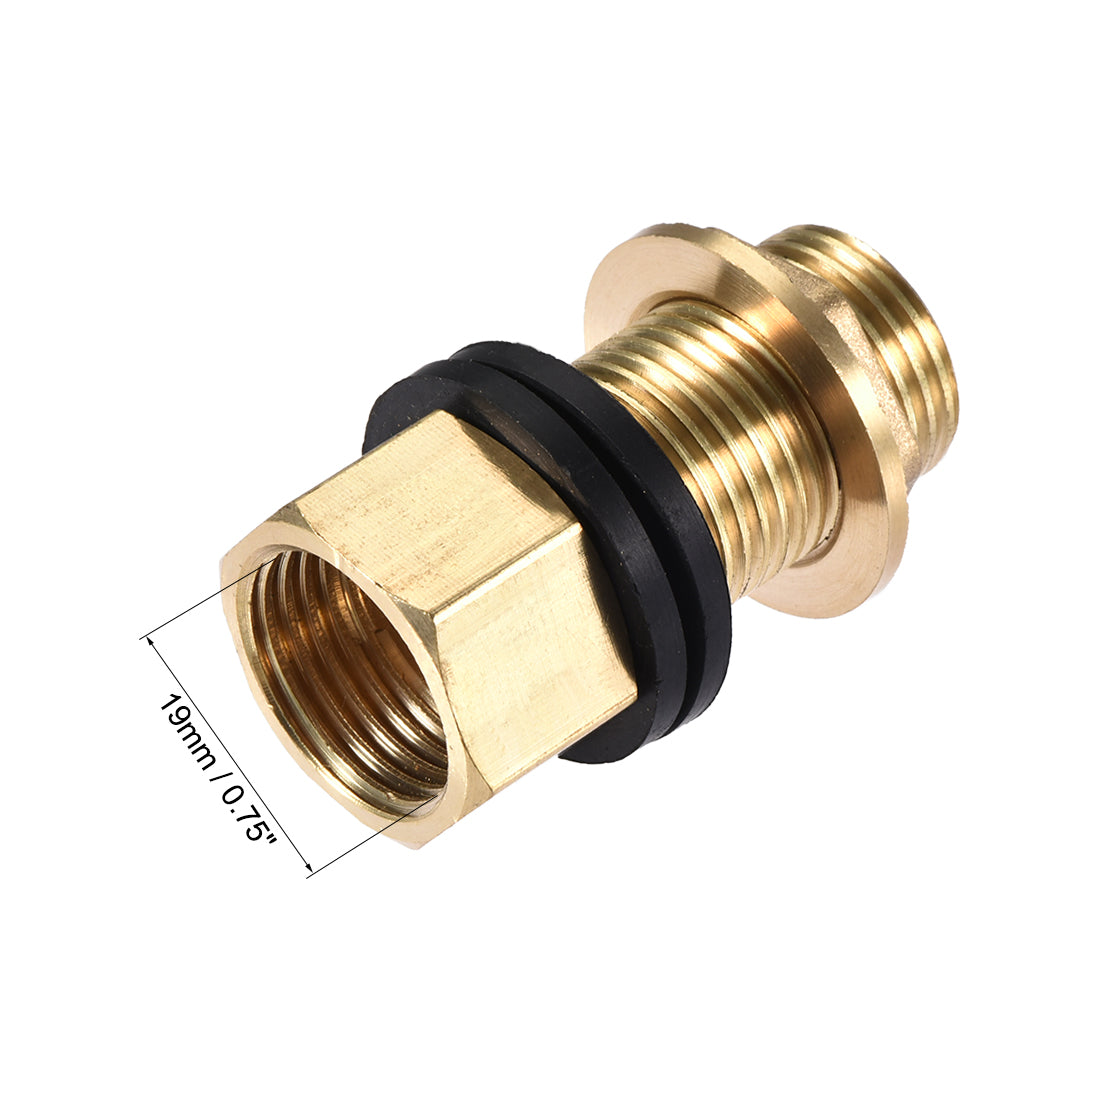 uxcell Uxcell Bulkhead Fitting, G1/2 Male 0.75" Female, Hex Tube Adaptor Hose Fitting, with Silicone Gaskets, for Water Tanks, Brass, Gold Tone, Pack of 2